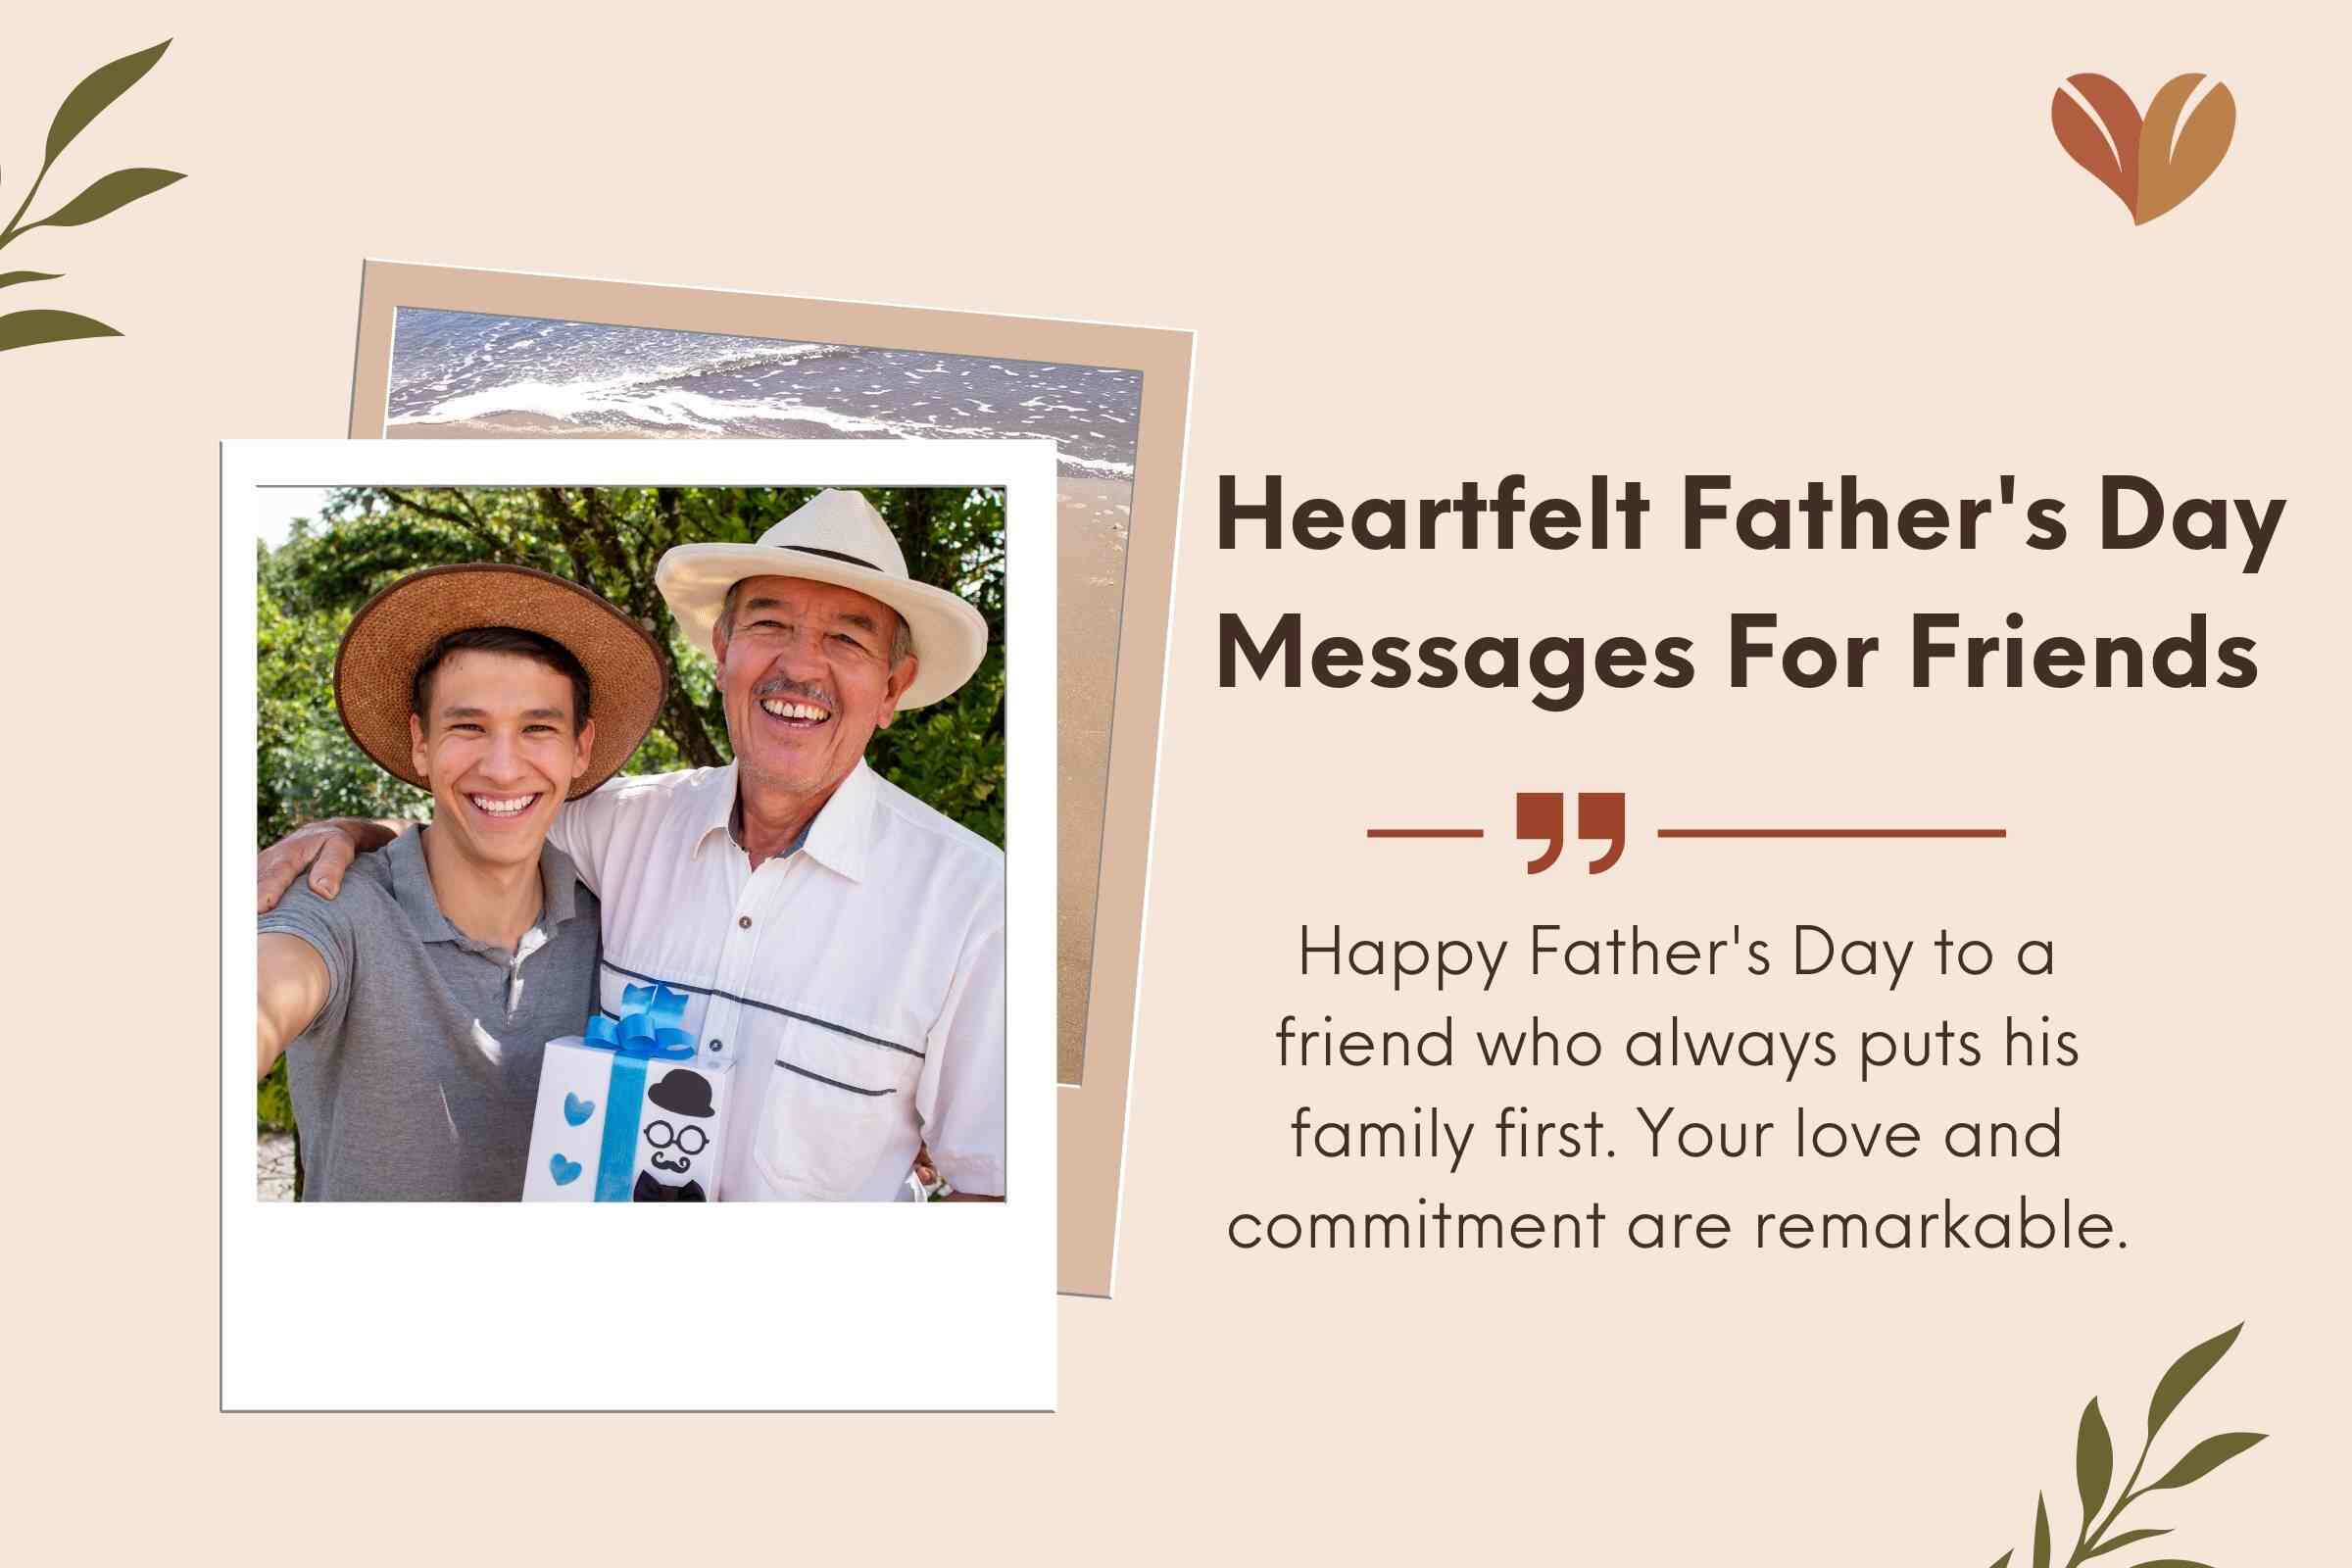 Heartfelt Father's Day Messages For Friends